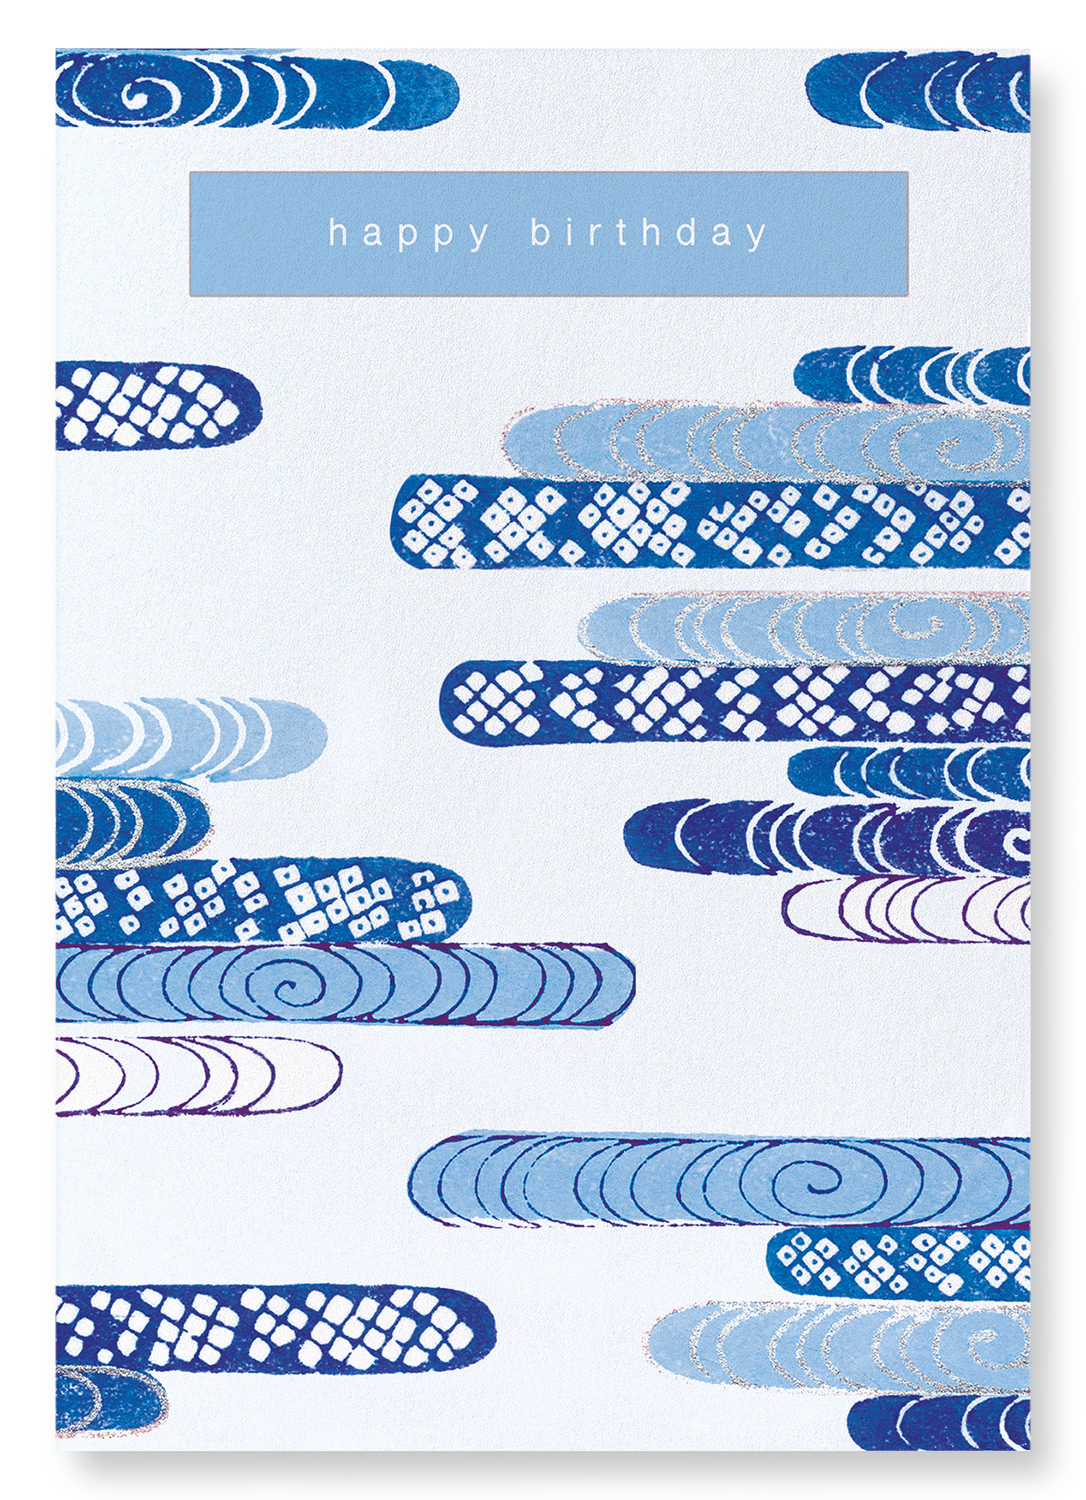 BLUE WAVES OF BIRTHDAY WISHES